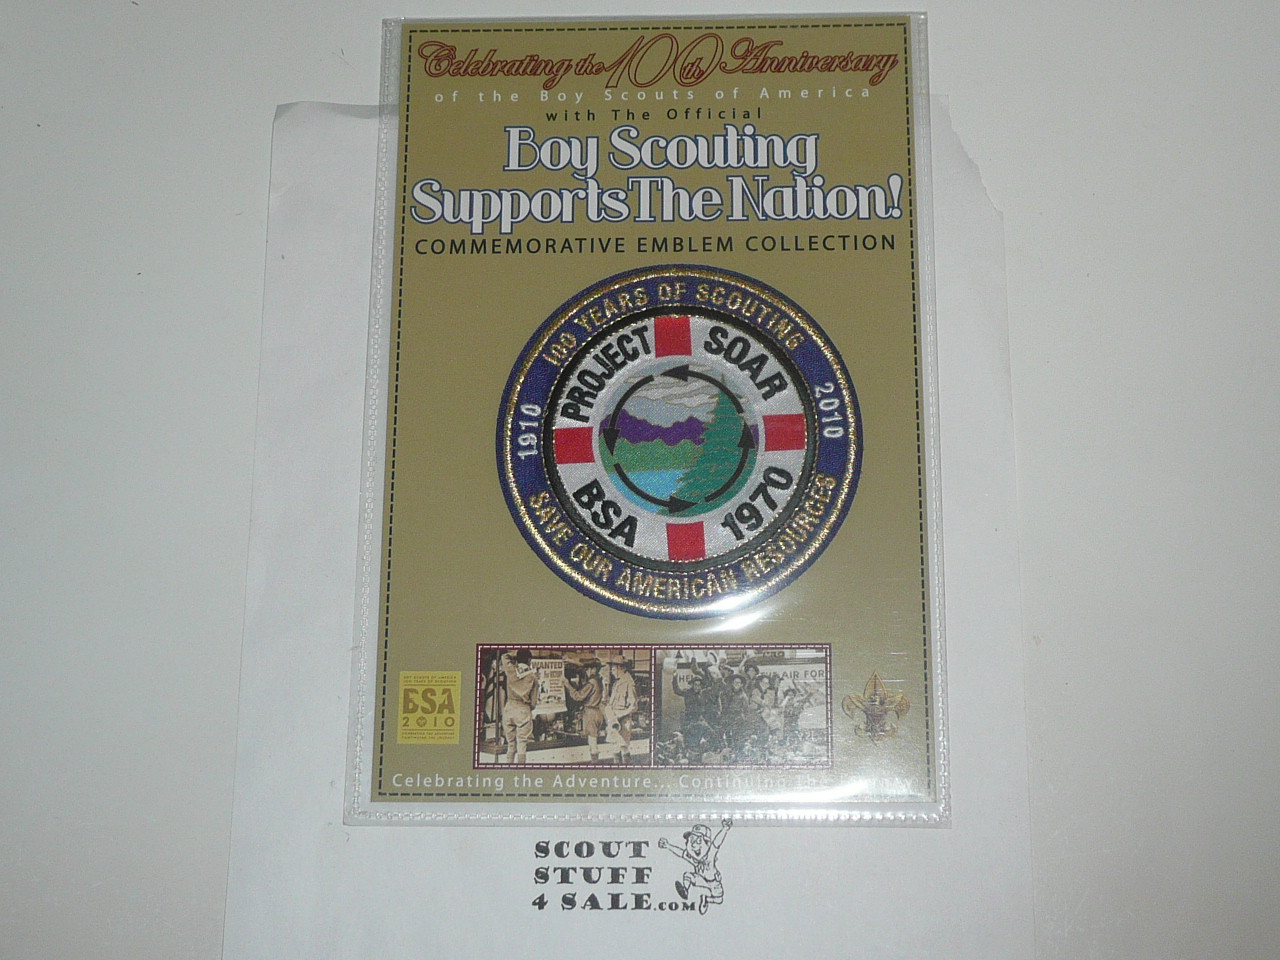 2010 100th Boy Scout Anniversary Commemorative Patch, Boy Scouting Supports the Nation Series, Project SOAR